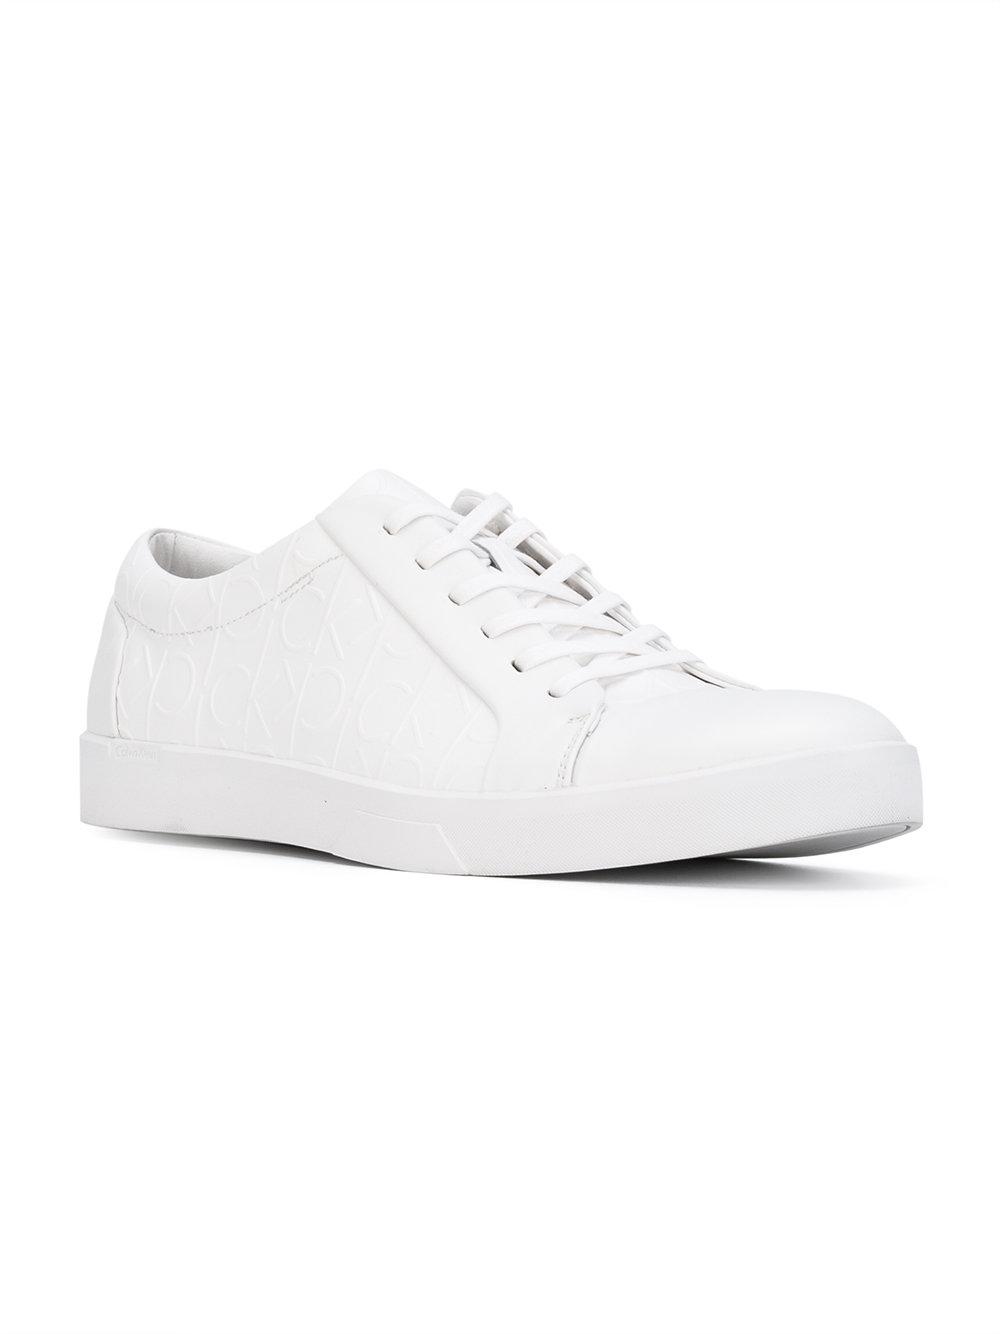 Calvin Klein Leather Logo Embossed Lace-up Sneakers in White for Men - Lyst